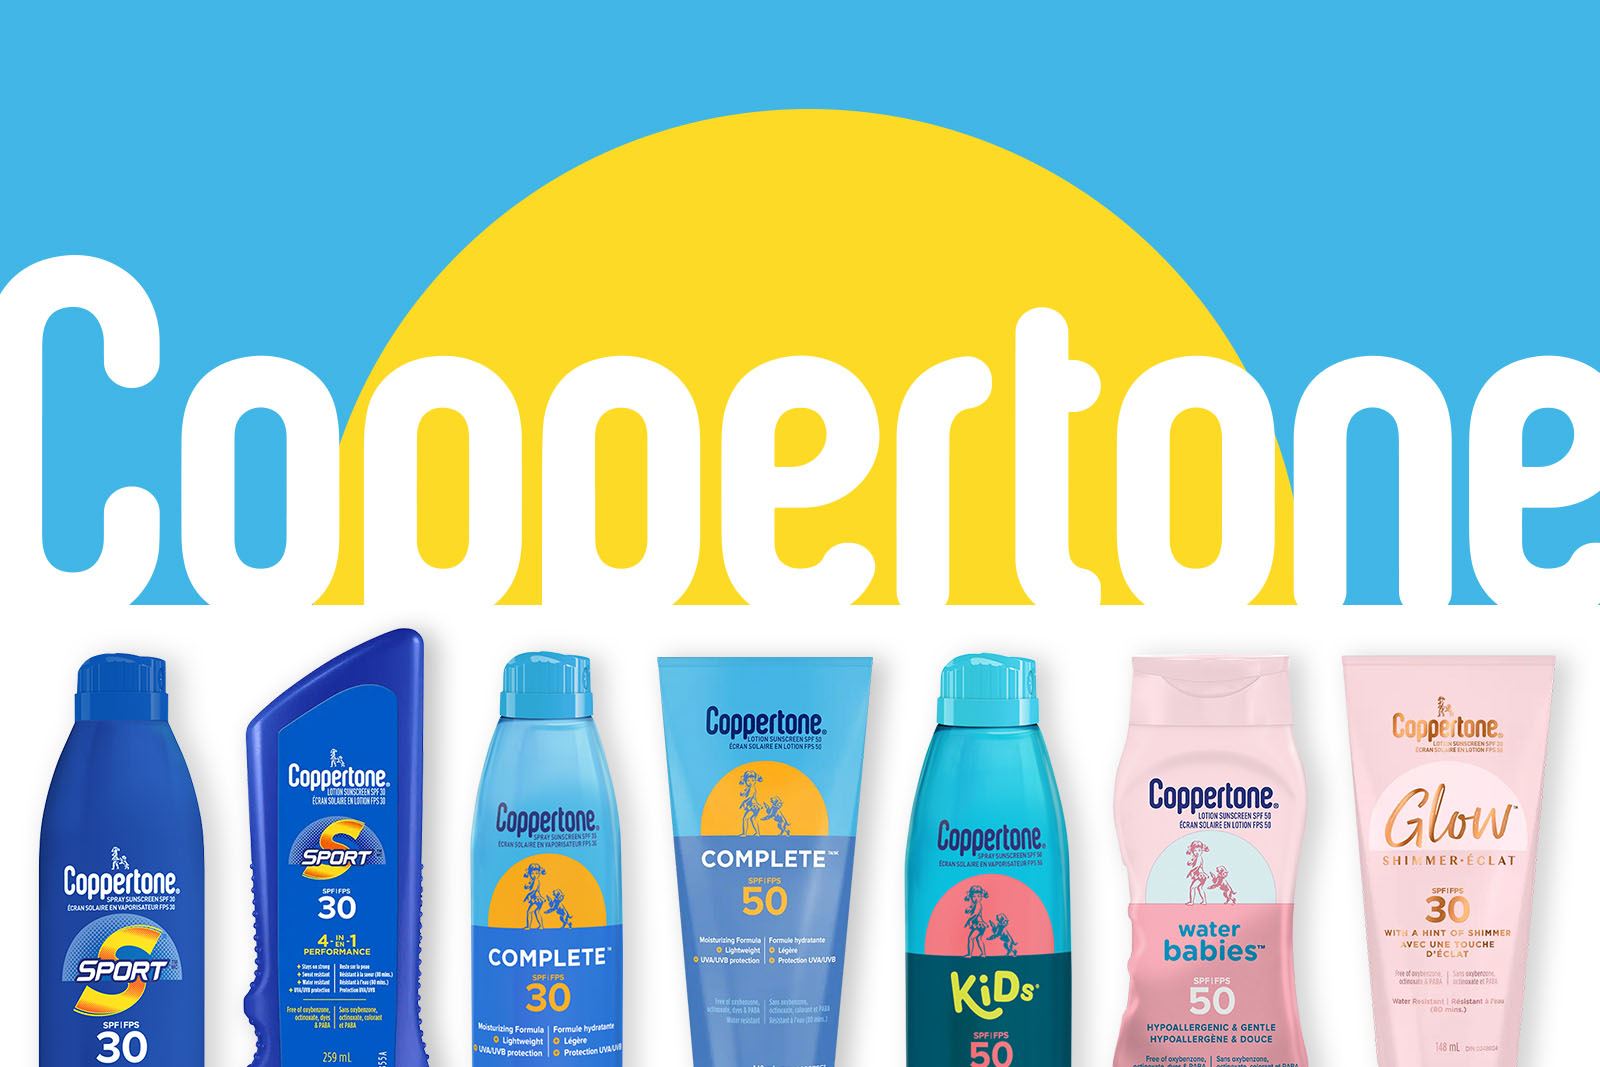 A view of eight Coppertone sunscreen products lined up beside each other against a blue and yellow background with Coppertone text displayed.